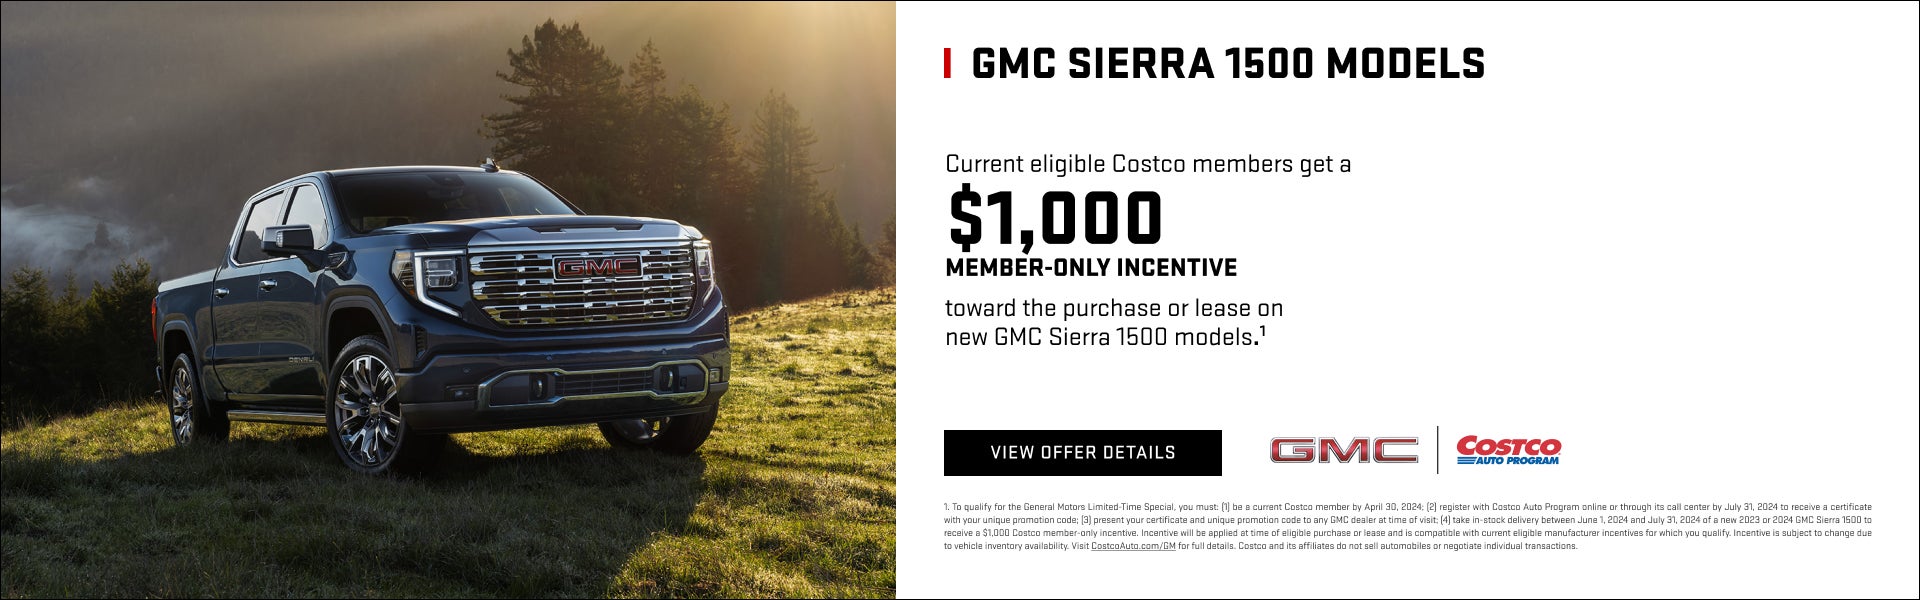 CURRENT ELIGIBLE COSTCO MEMBERS GET A
$1,000 MEMBER-ONLY INCENTIVE
TOWARD THE PURCHASE OR LEASE
O...